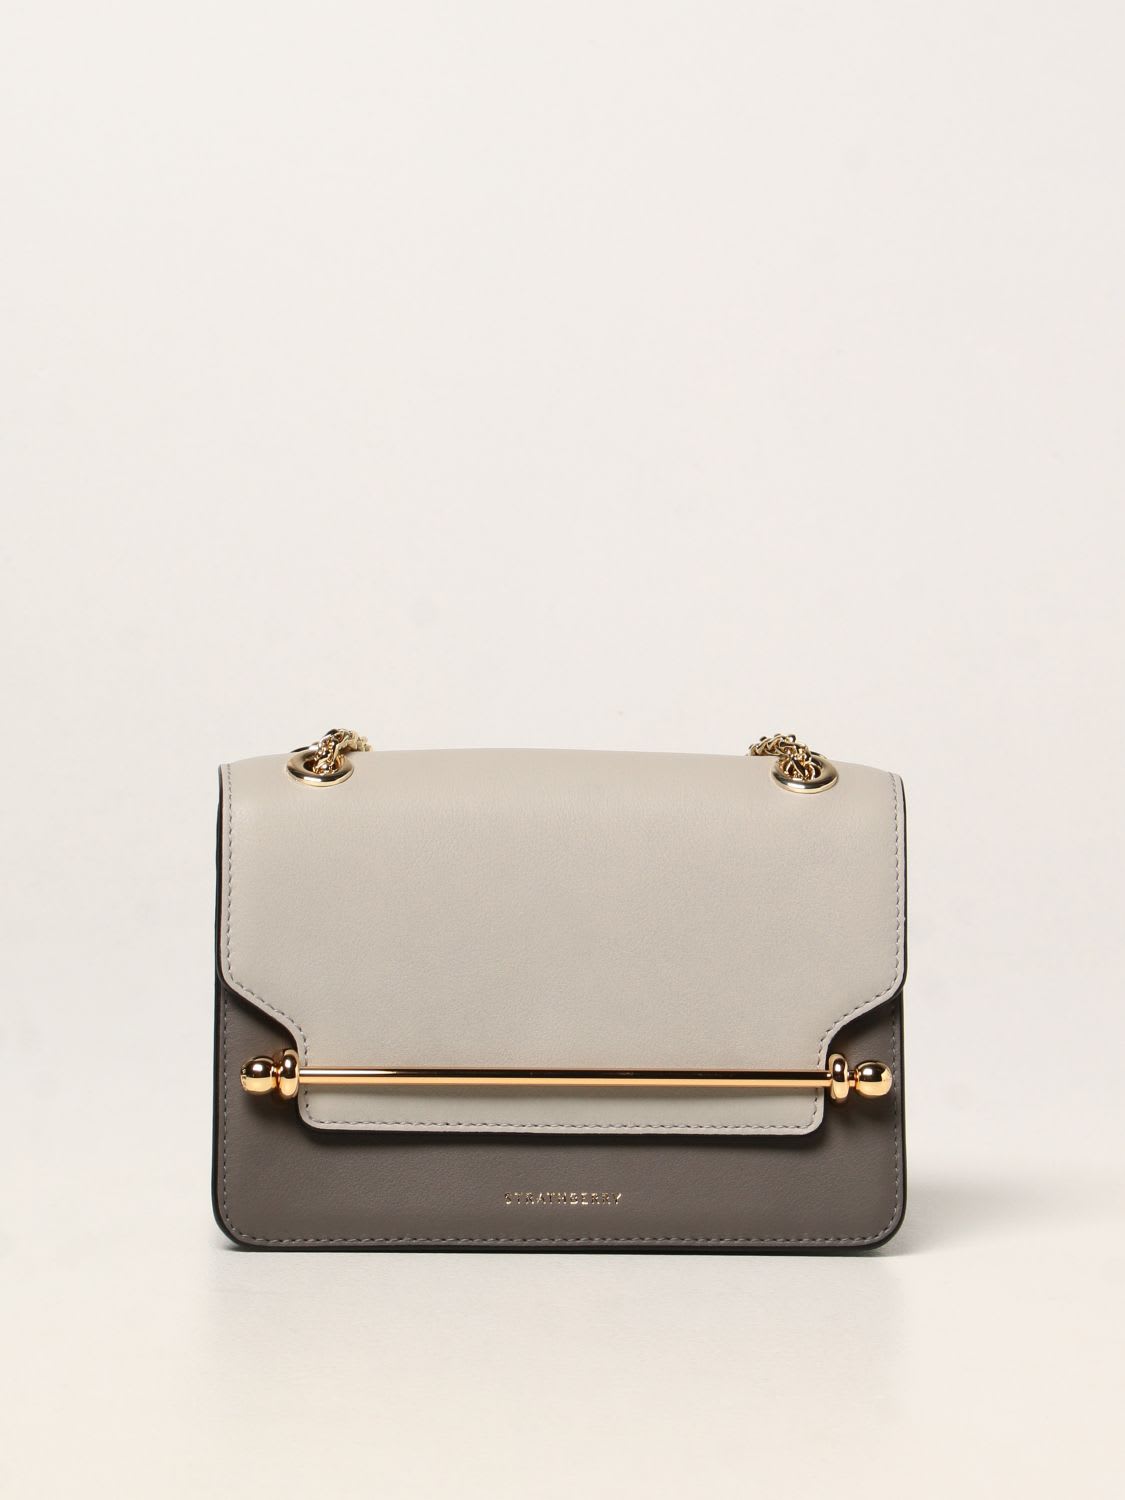 Strathberry Mini Bag East / West Mini Strathberry Bag In Bicolor Leather